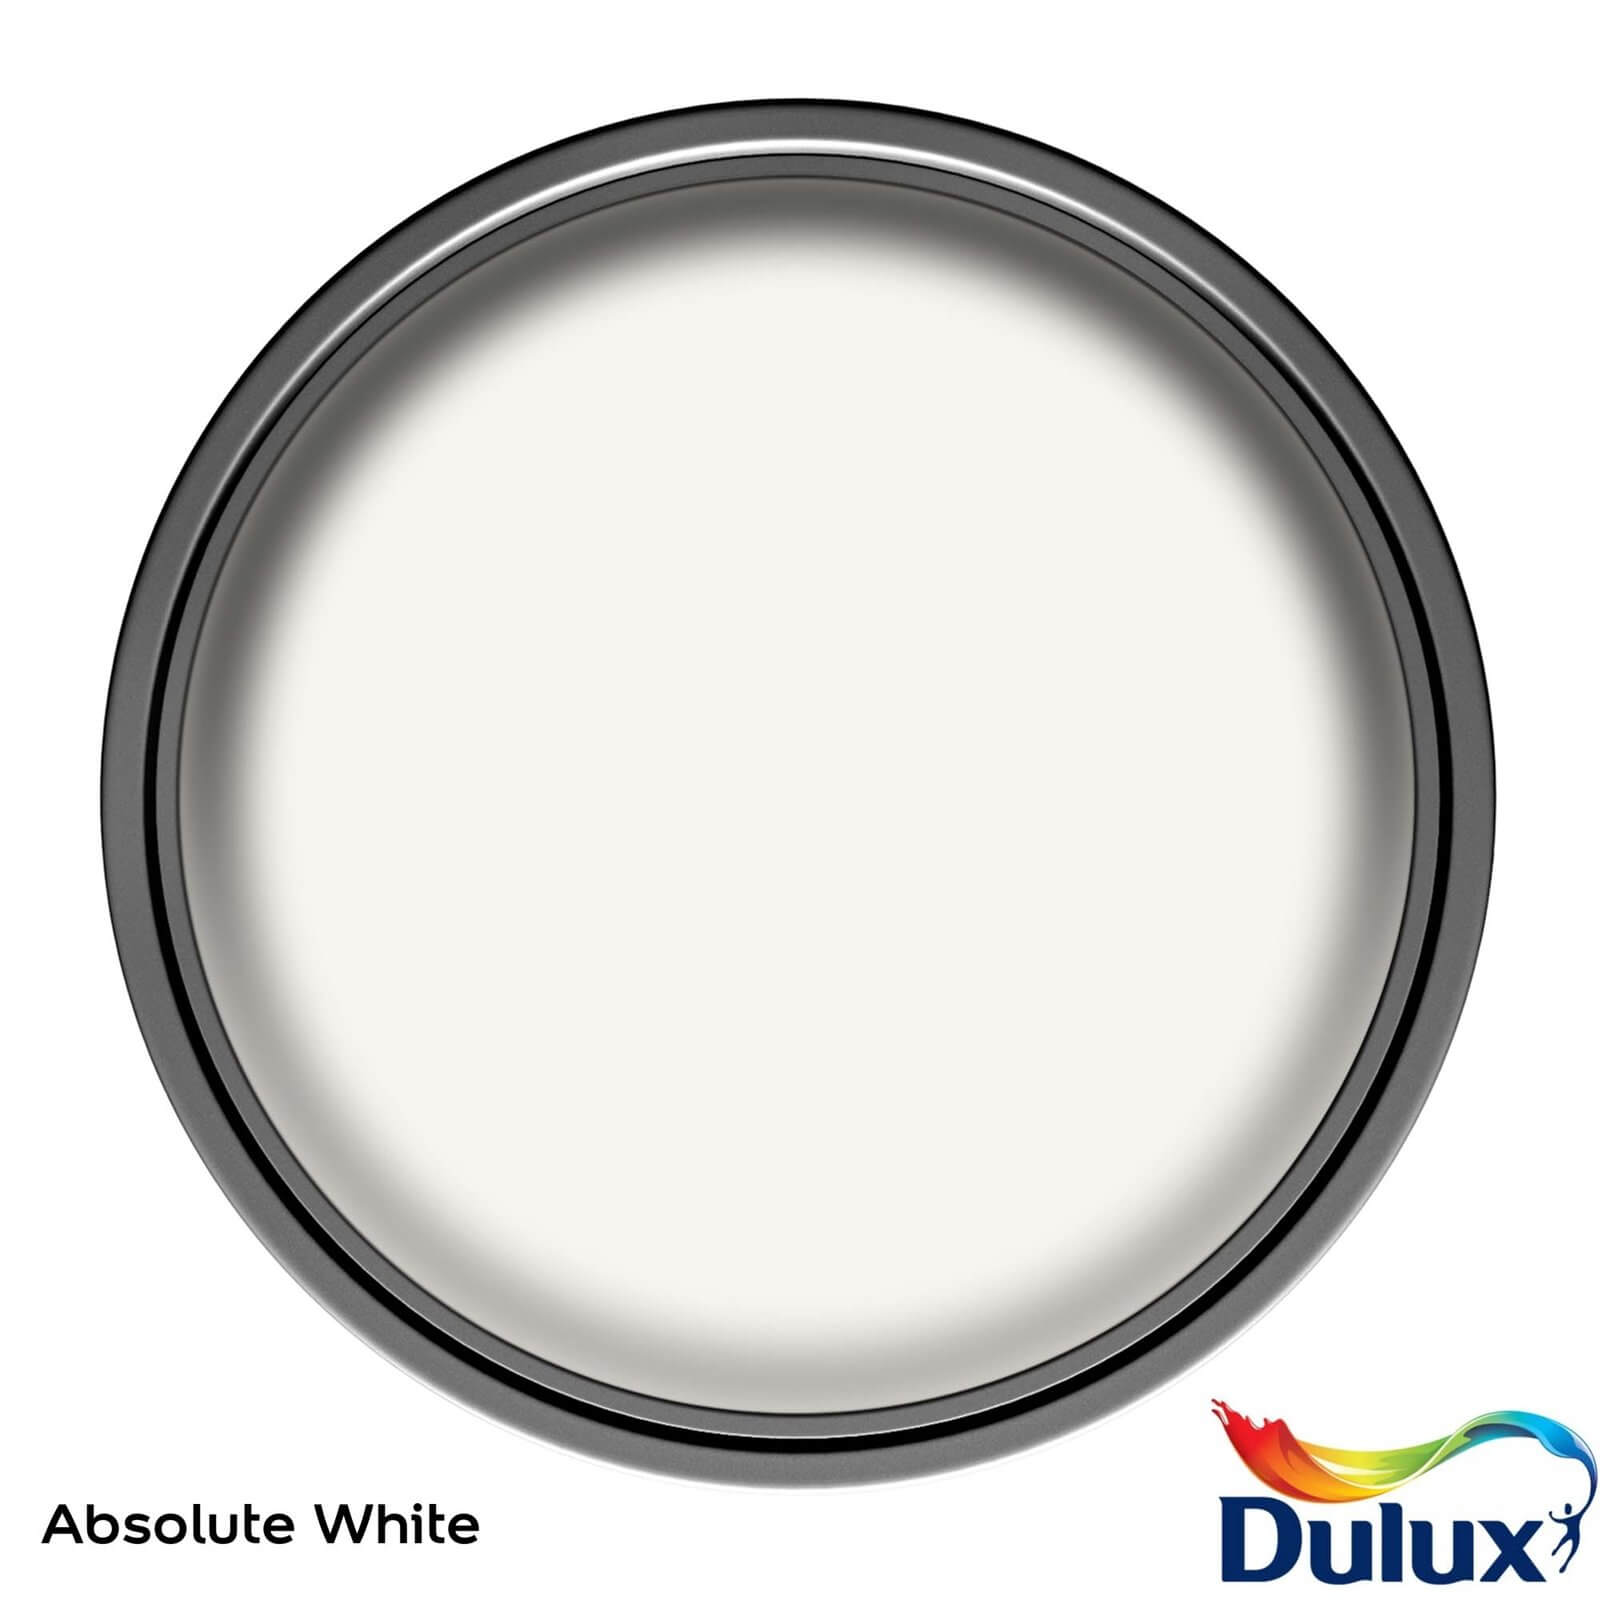 Dulux Quick Dry Satinwood Paint Absolute White - 750ml